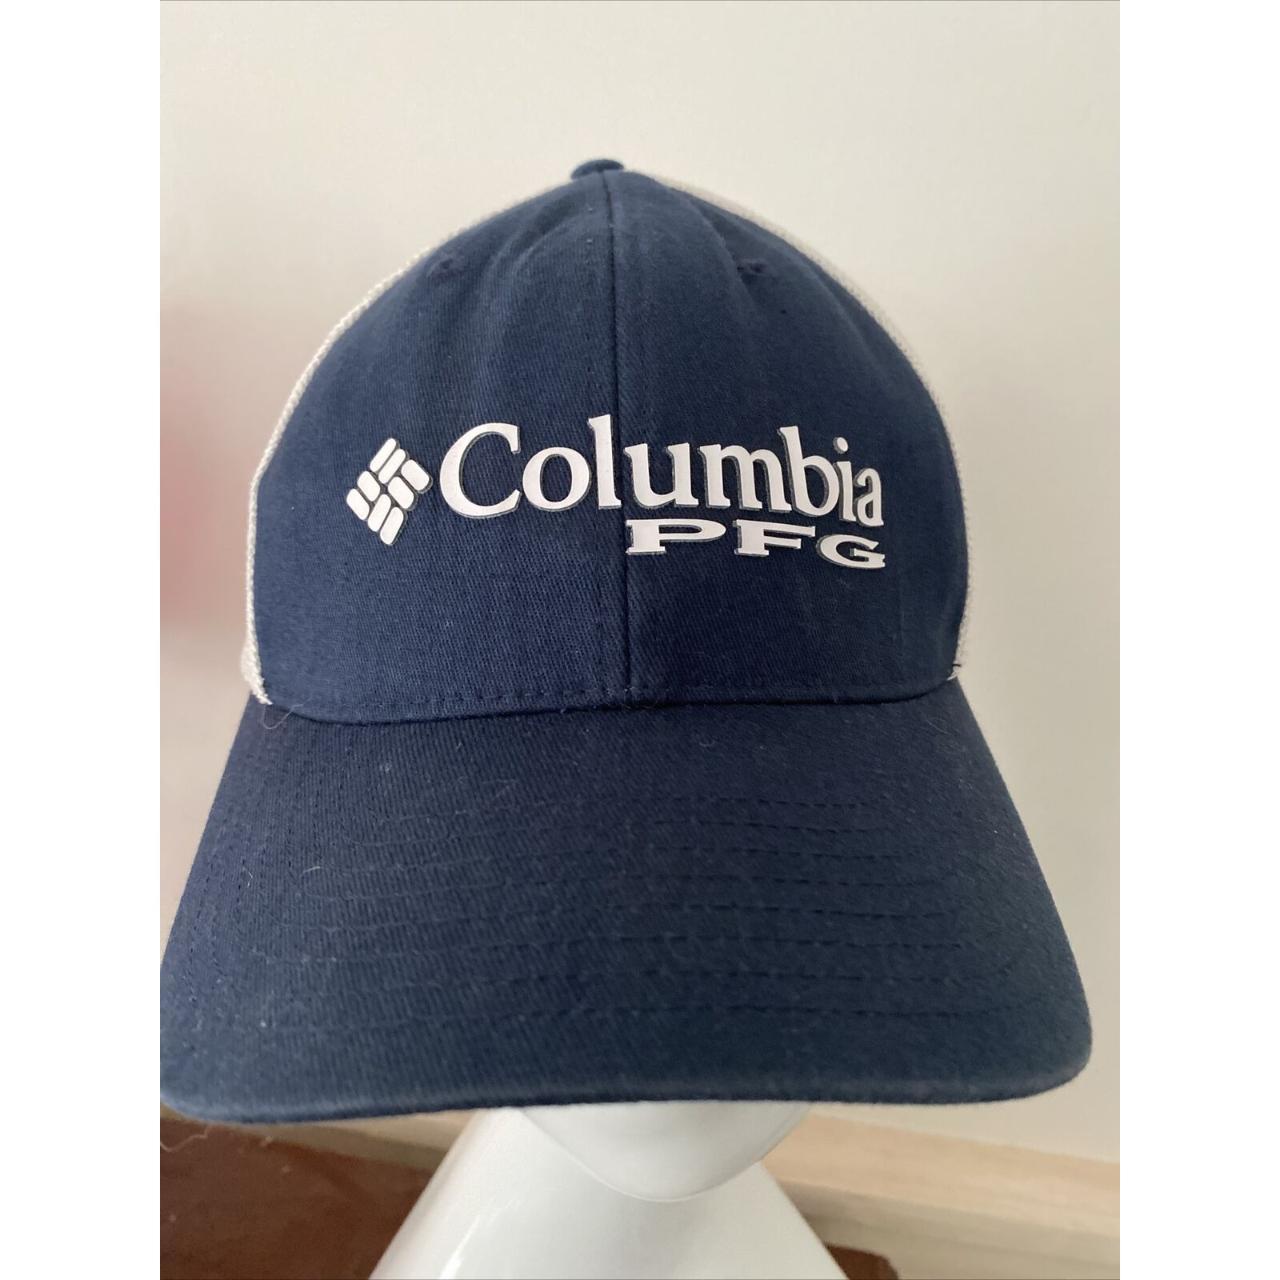 Columbia PFG Flexfit Hat. Elevate your outdoor style